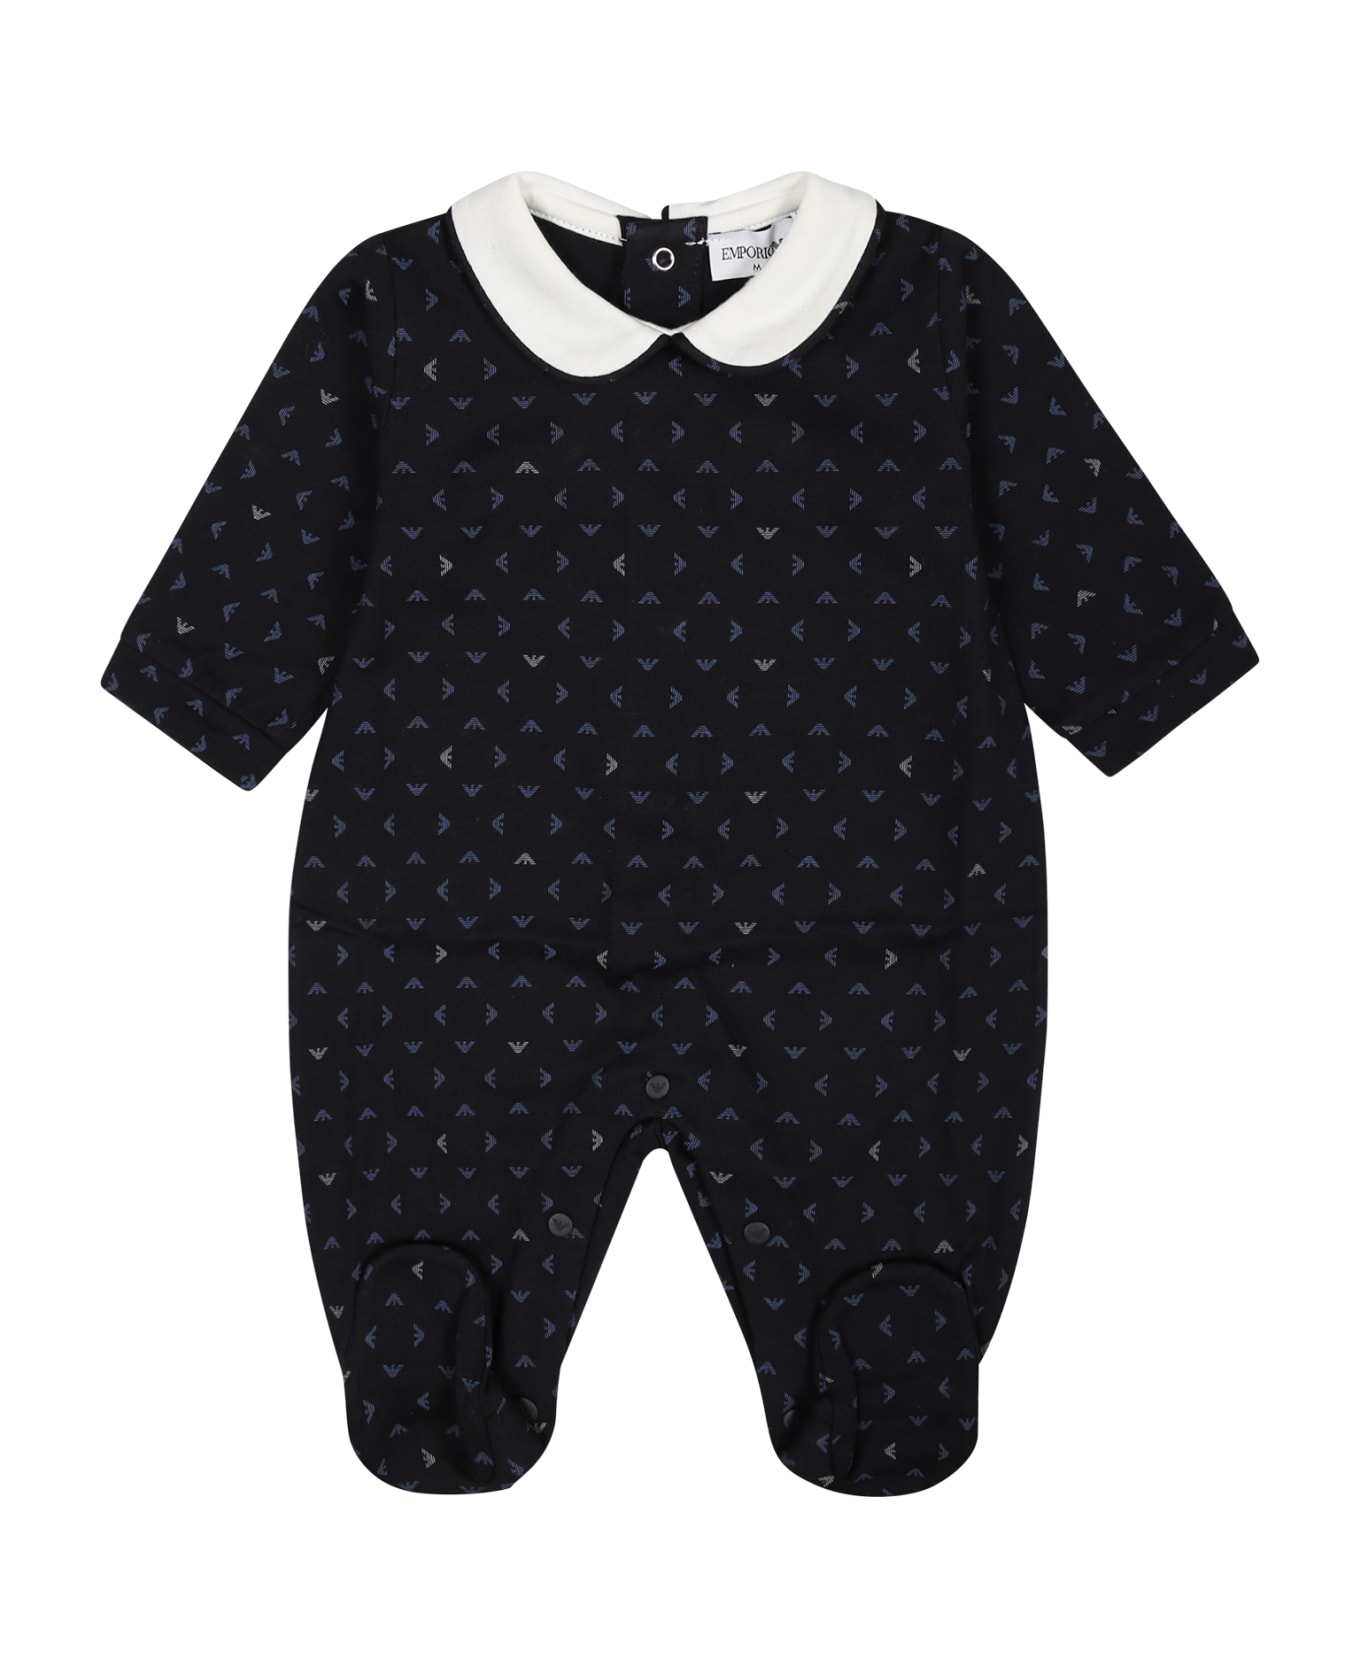 Emporio Armani Blue Playsuit For Baby Boy With All-over Eagle Logo - Blue